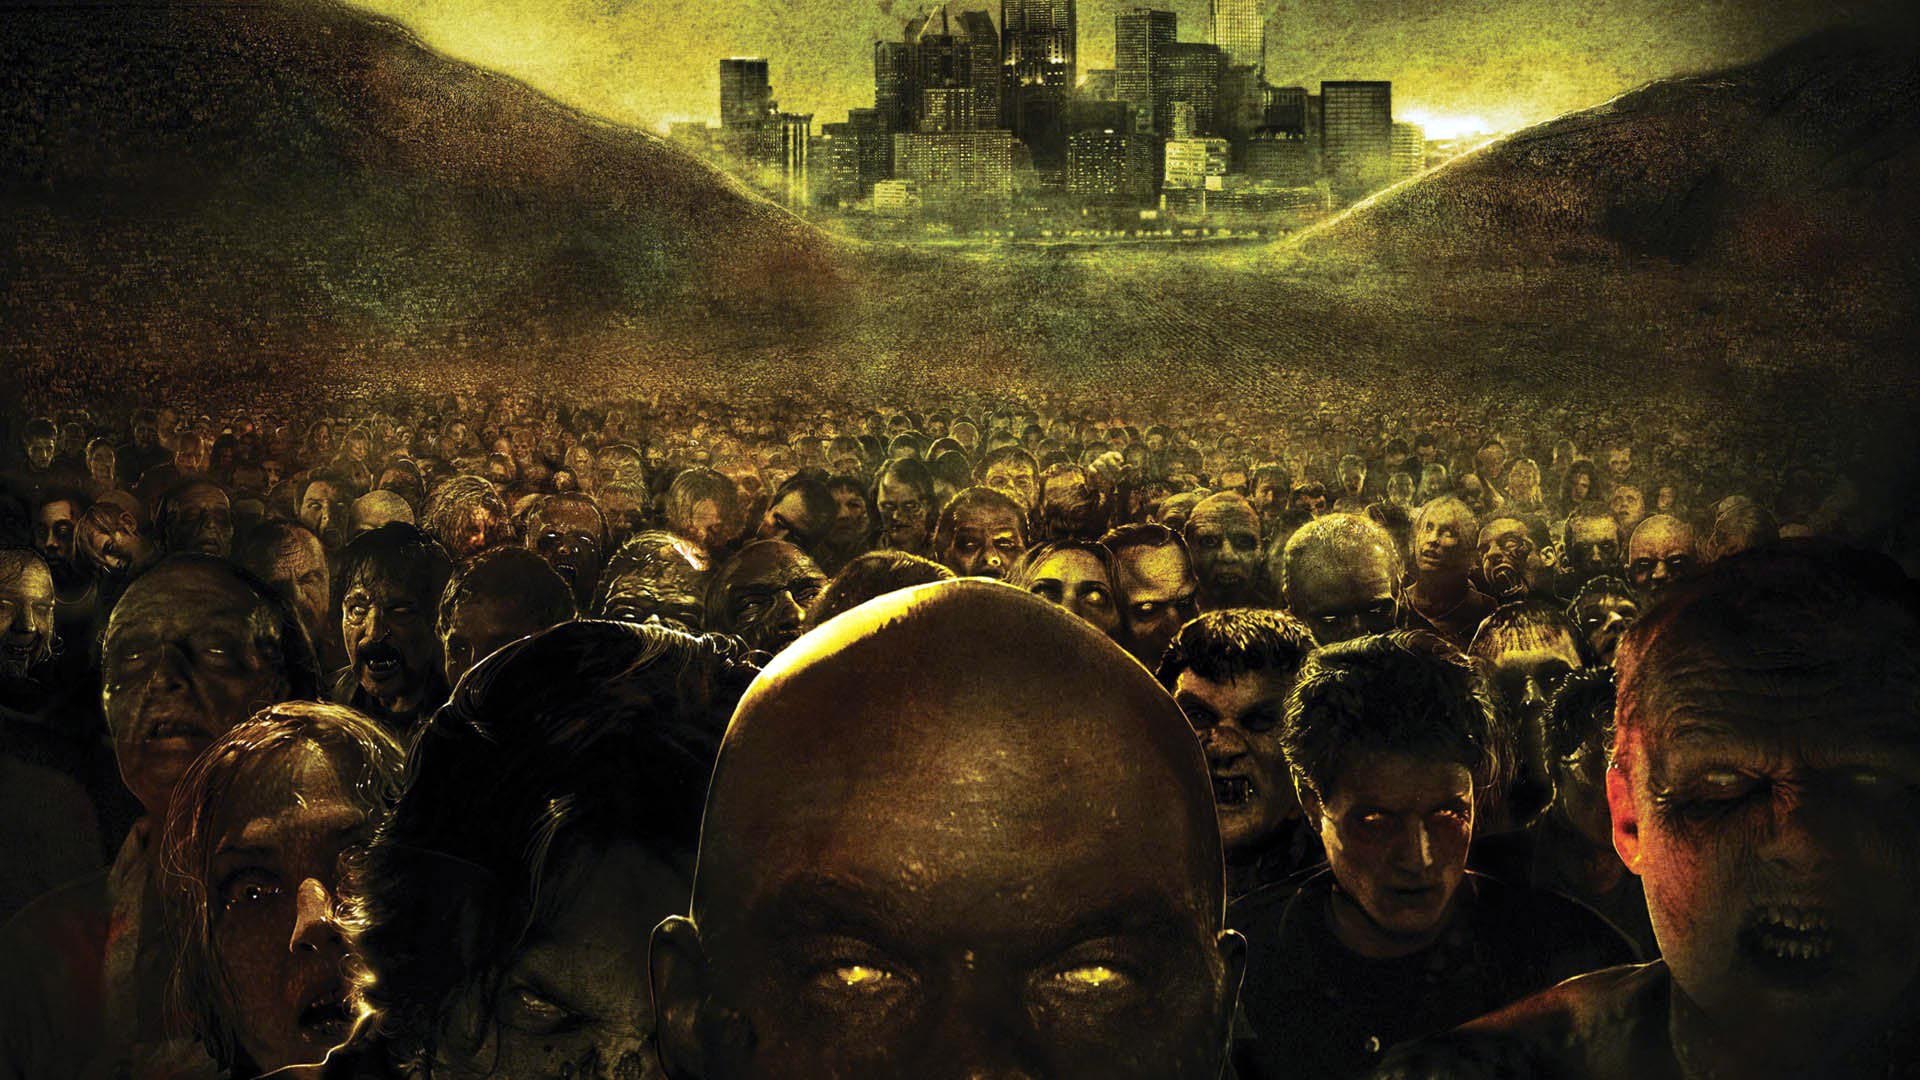 Zombie HD Backgrounds